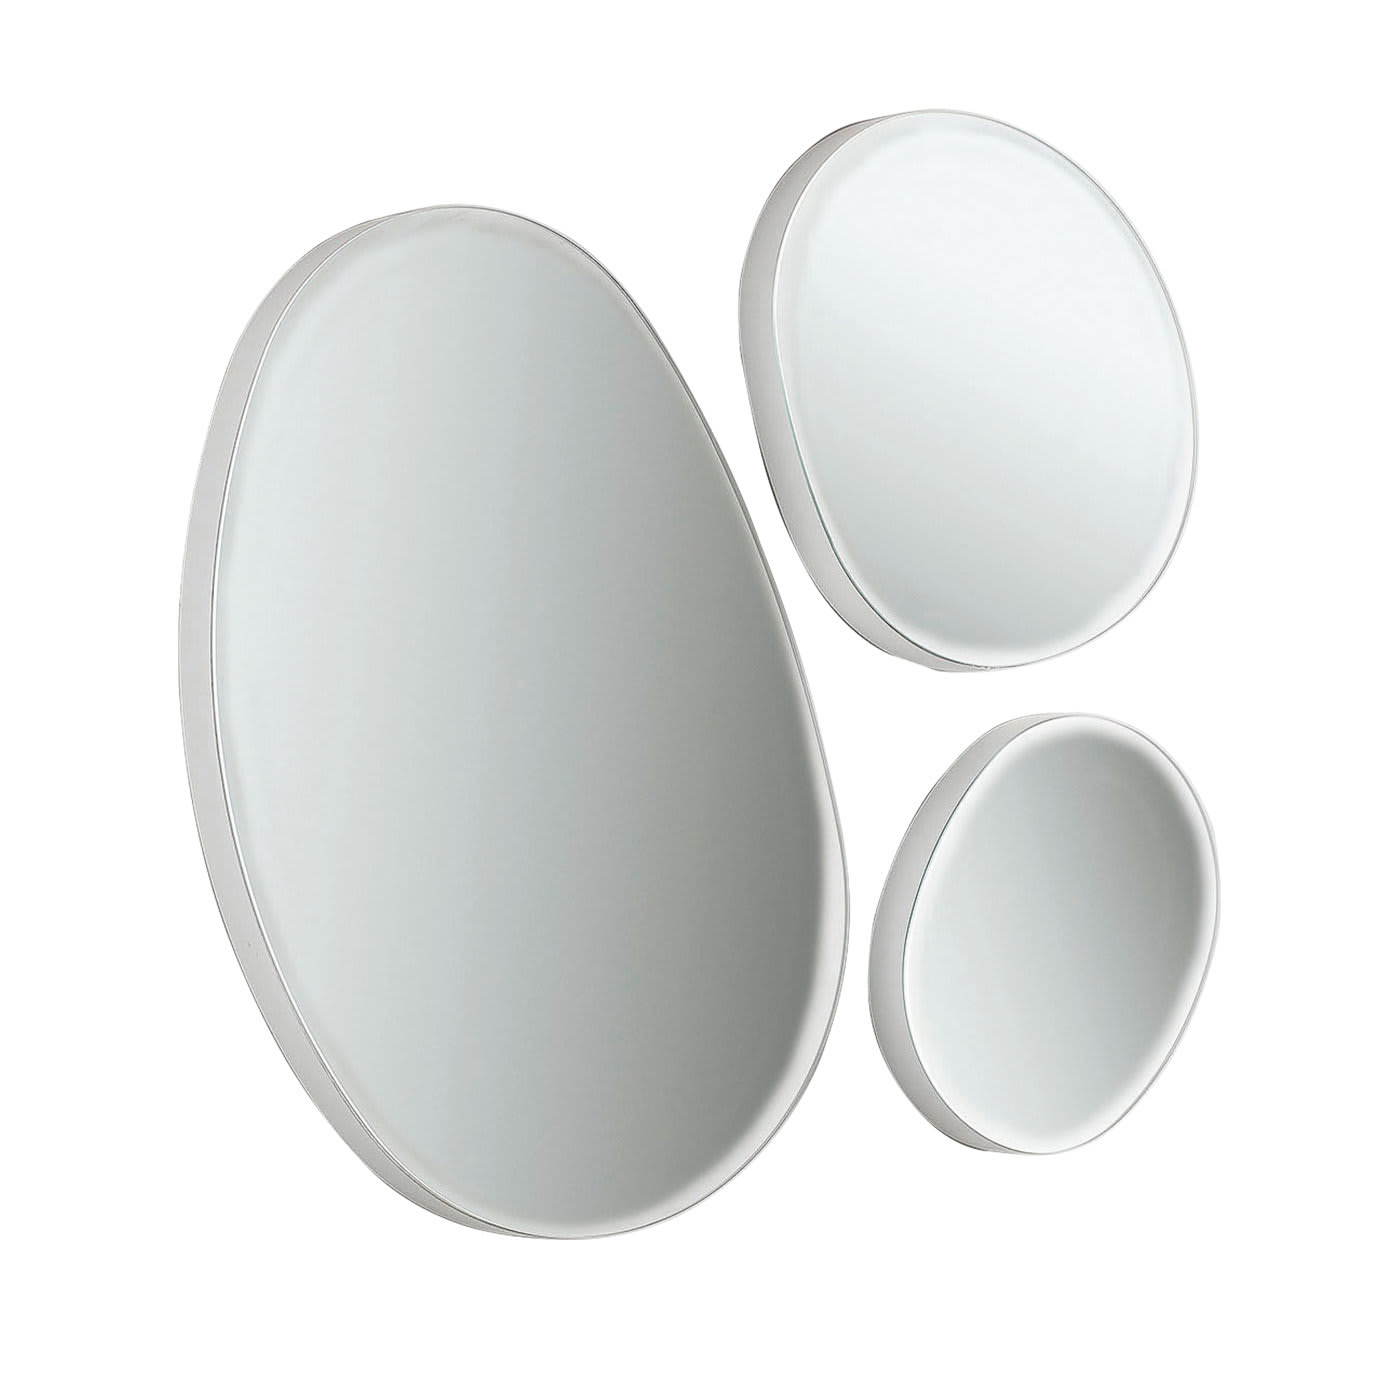 Set of 3 Drop Wall Mirrors - Dall'Agnese